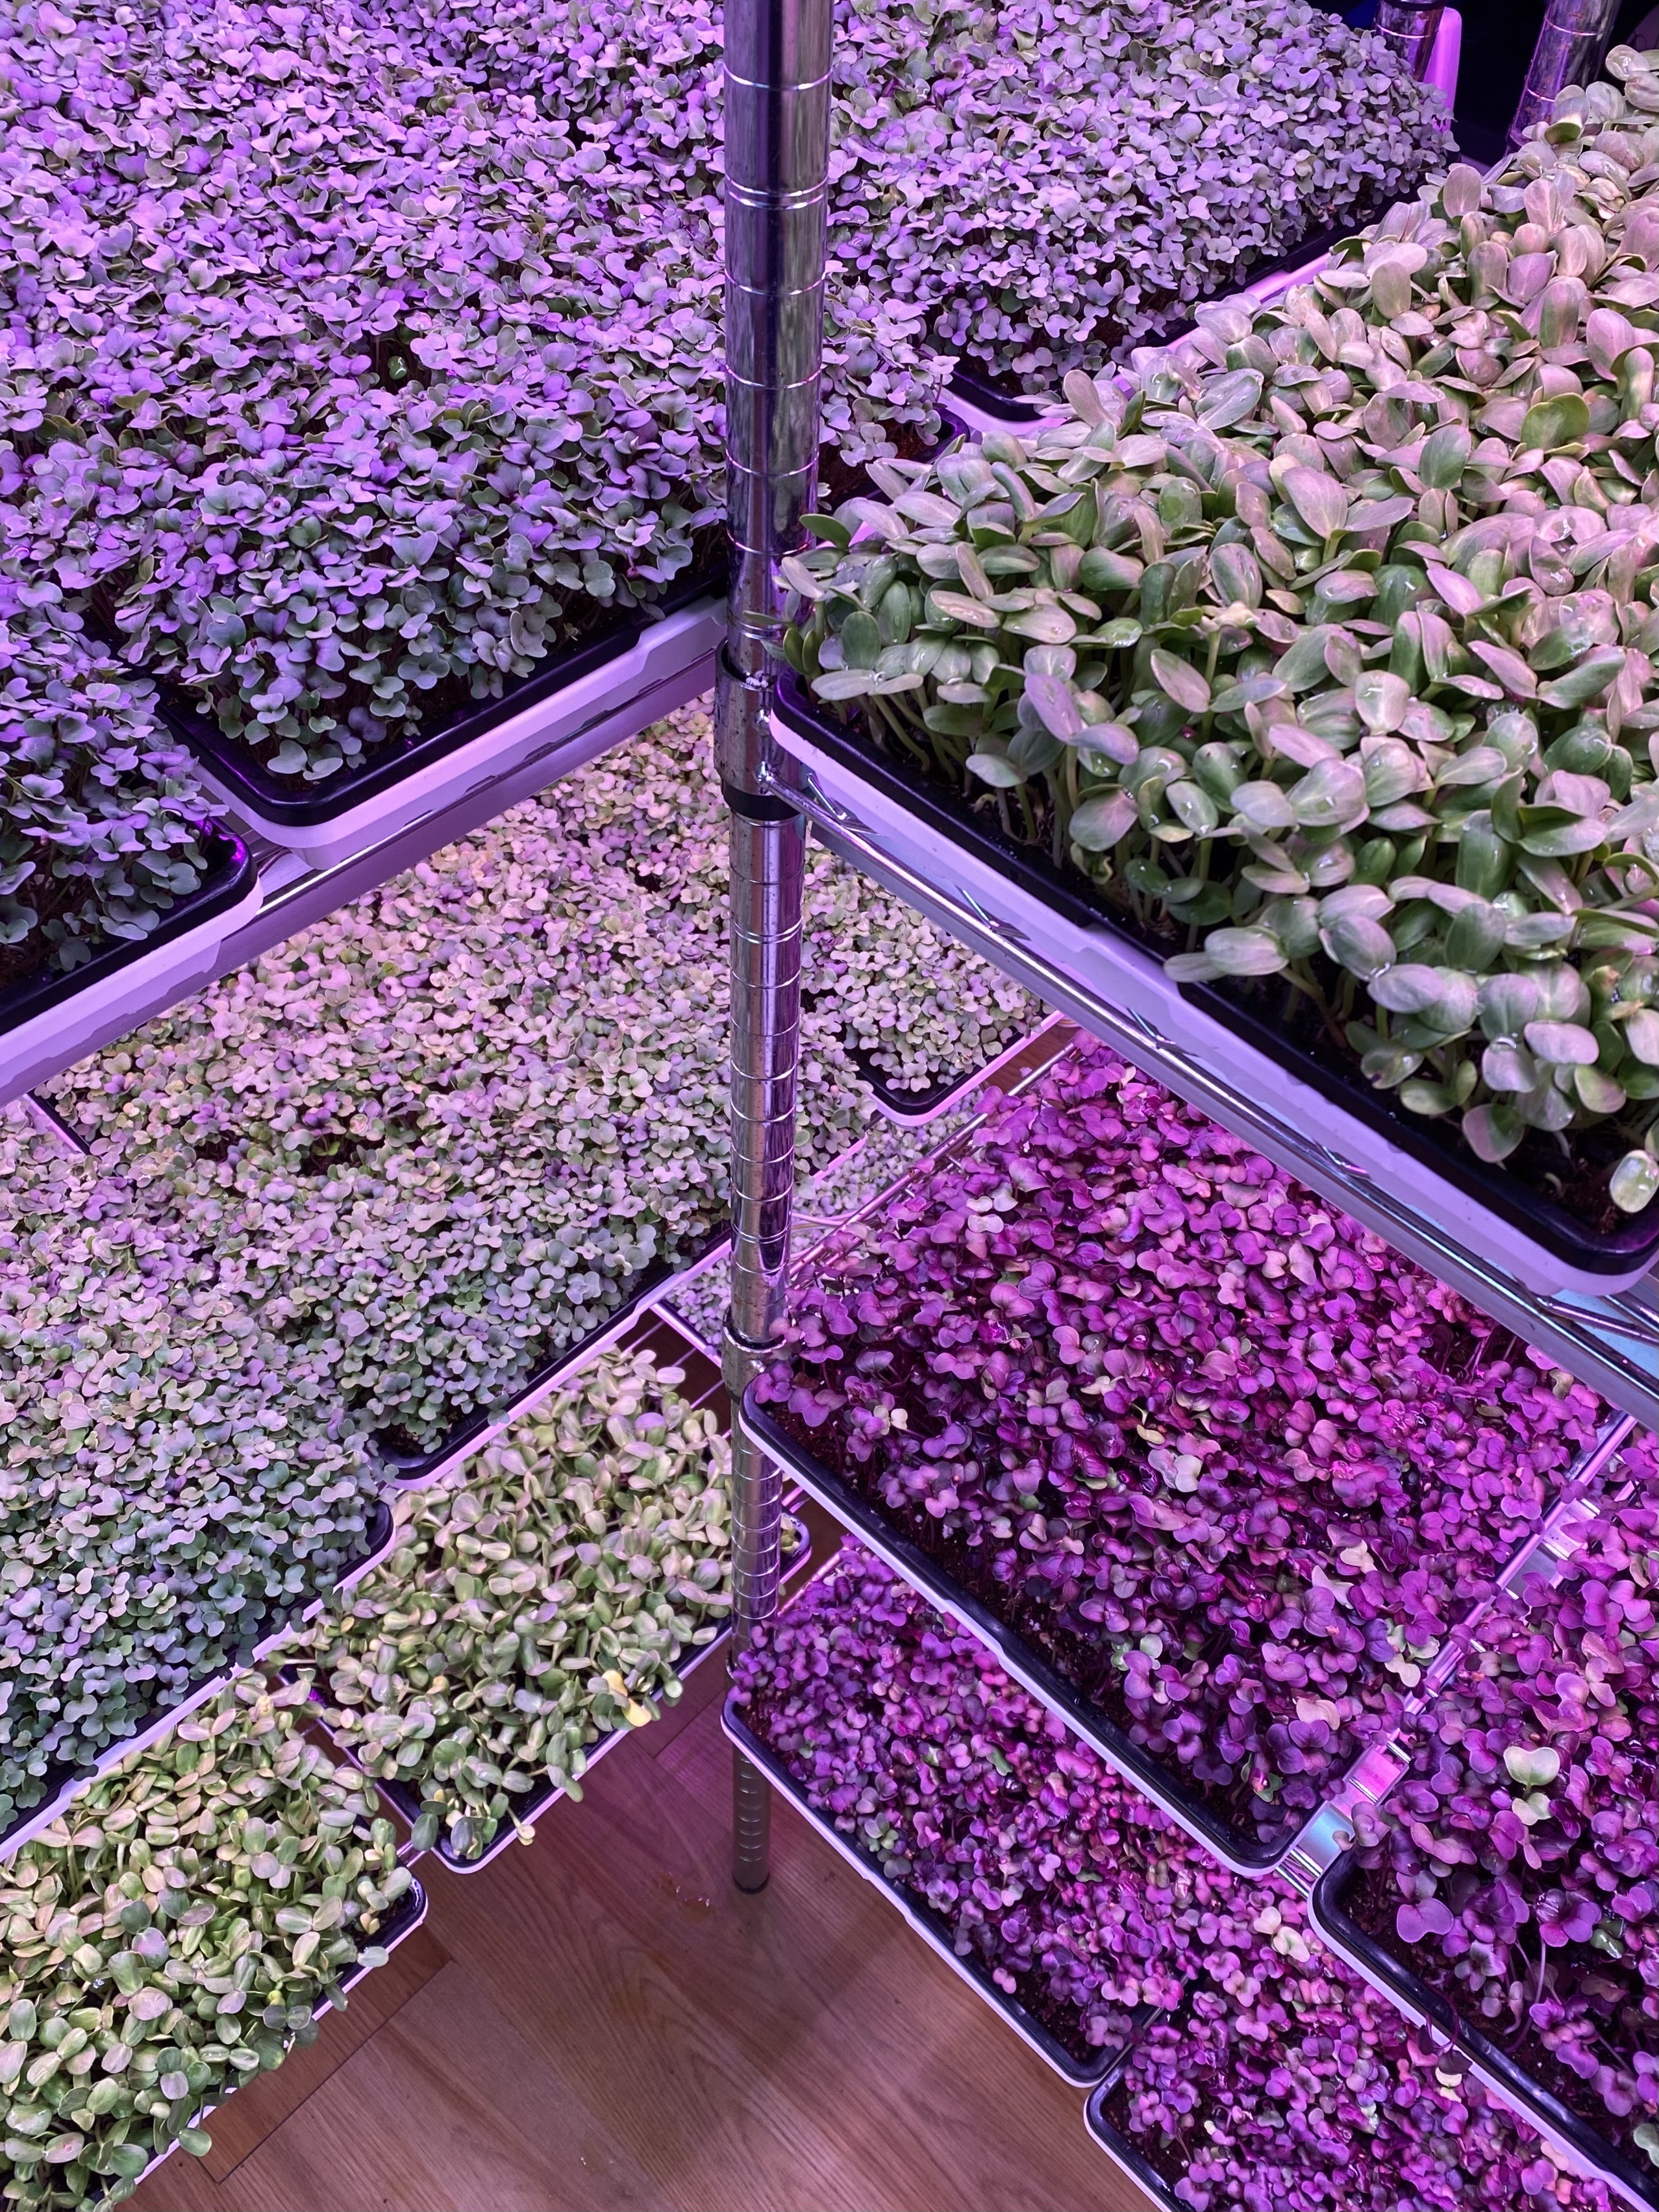 benches of flats containing microgreens